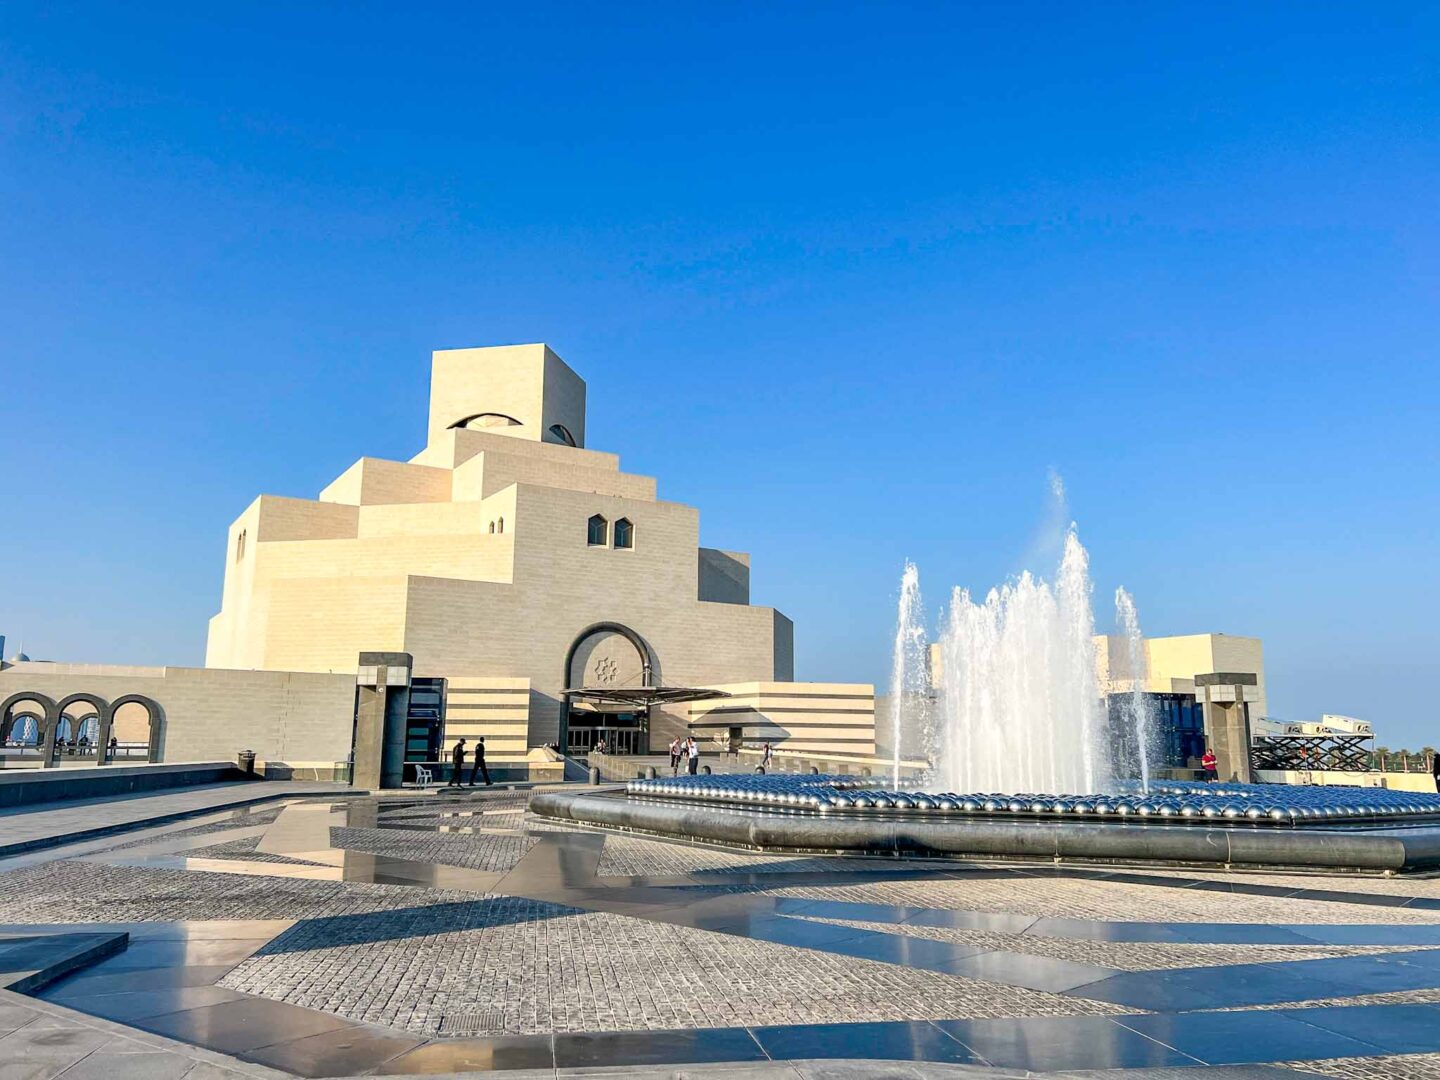 outside the museum of islamic art with fountain, Qatar Stopover, one day in Doha,